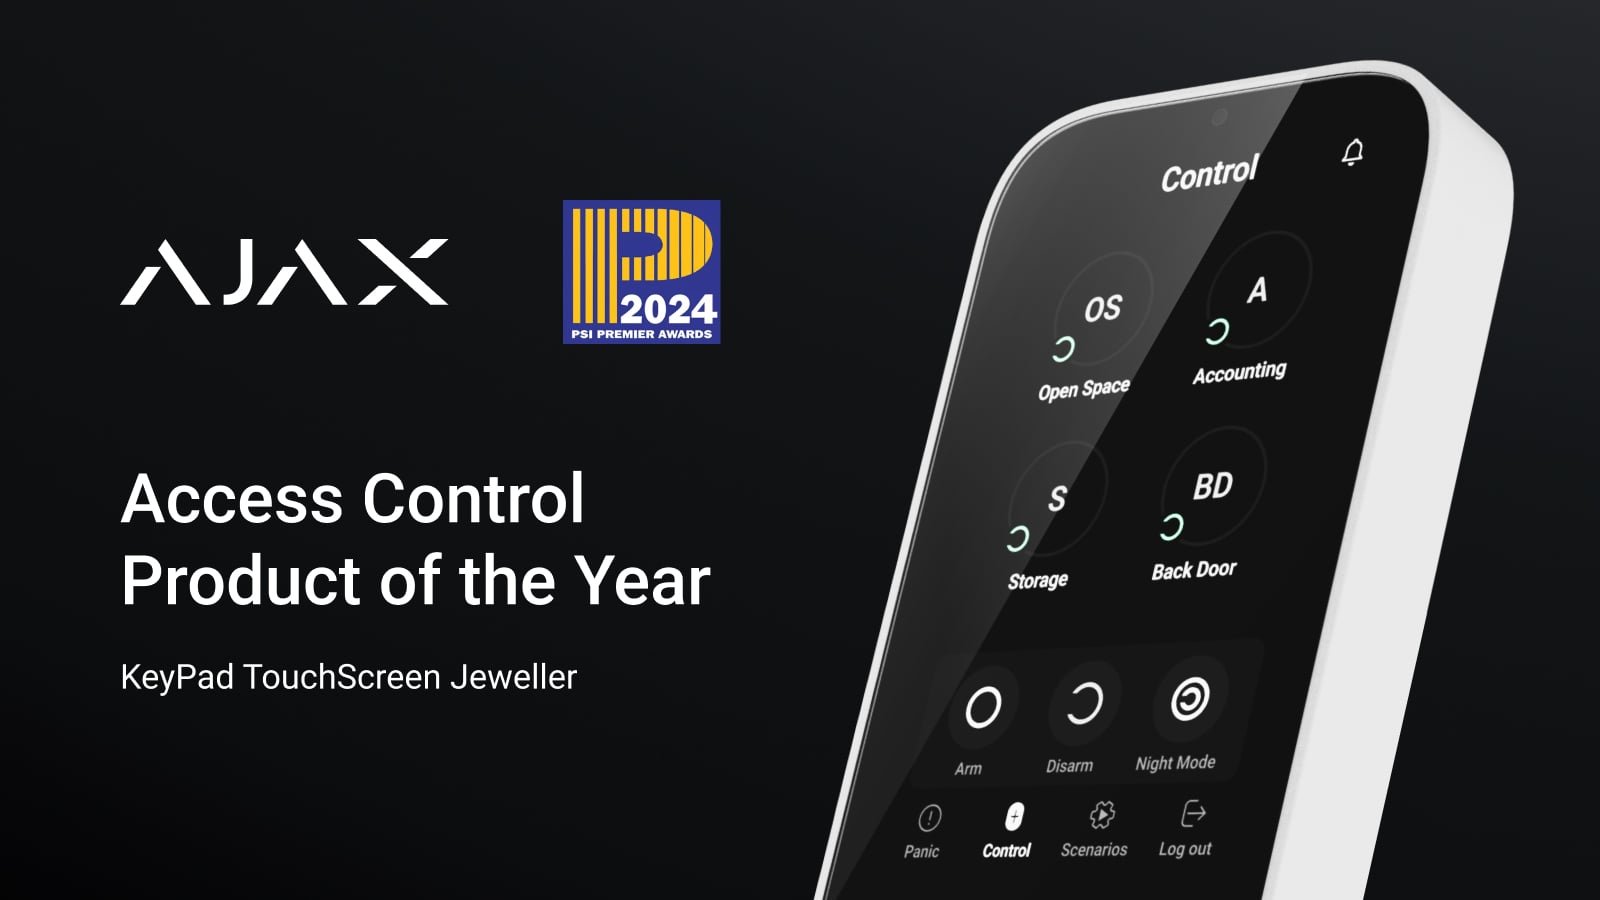 KeyPad TouchScreen Jeweller wins PSI Premier Awards 2024 as Access Control Product of the Year